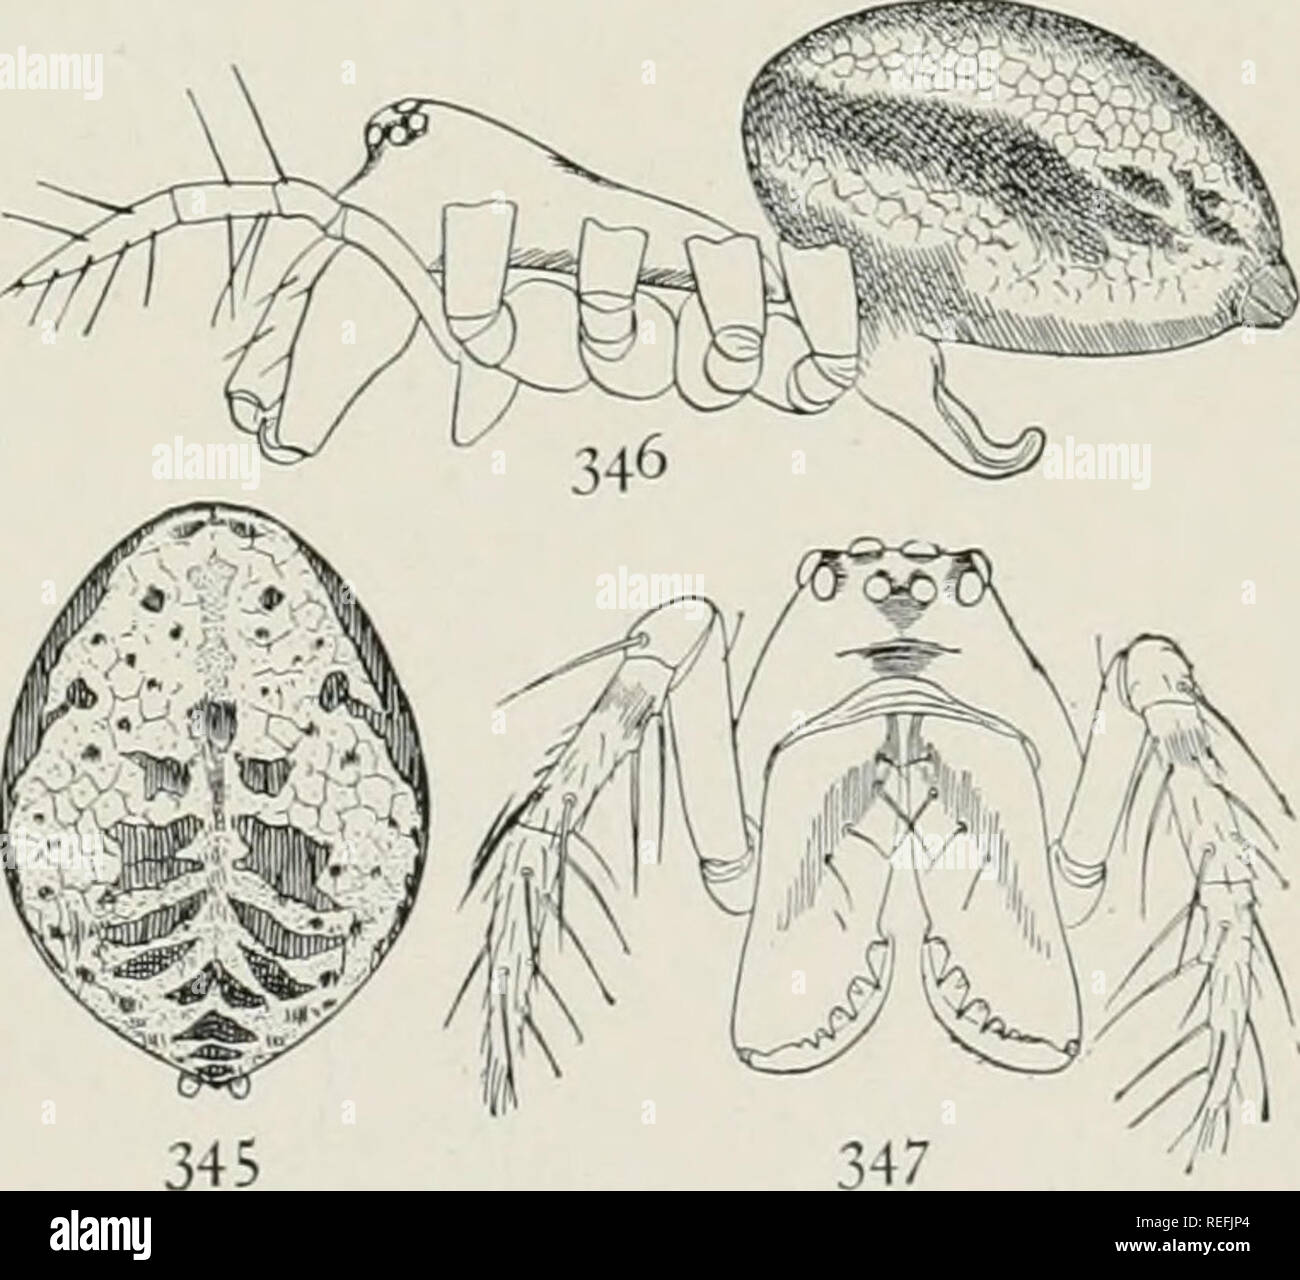 . The common spiders of the United States. Spiders. light with dark mark- ings, as in nebulosa. The legs are light brownish yellow, with dark rings on the ends and middle of the femora and tibiae. The epigynum is folded twice, as in nebu- losa (fig. 343). The male palpi (fig. 344) have a general resemblance to those of nebulosa, but there are some distinct differences. The tarsal hook is very large and has a longer and narrower point than nebulosa. The tarsus has on the outer side near the base a conical point roughened with short ridges. This is more prominent in this species than in nebulosa Stock Photo